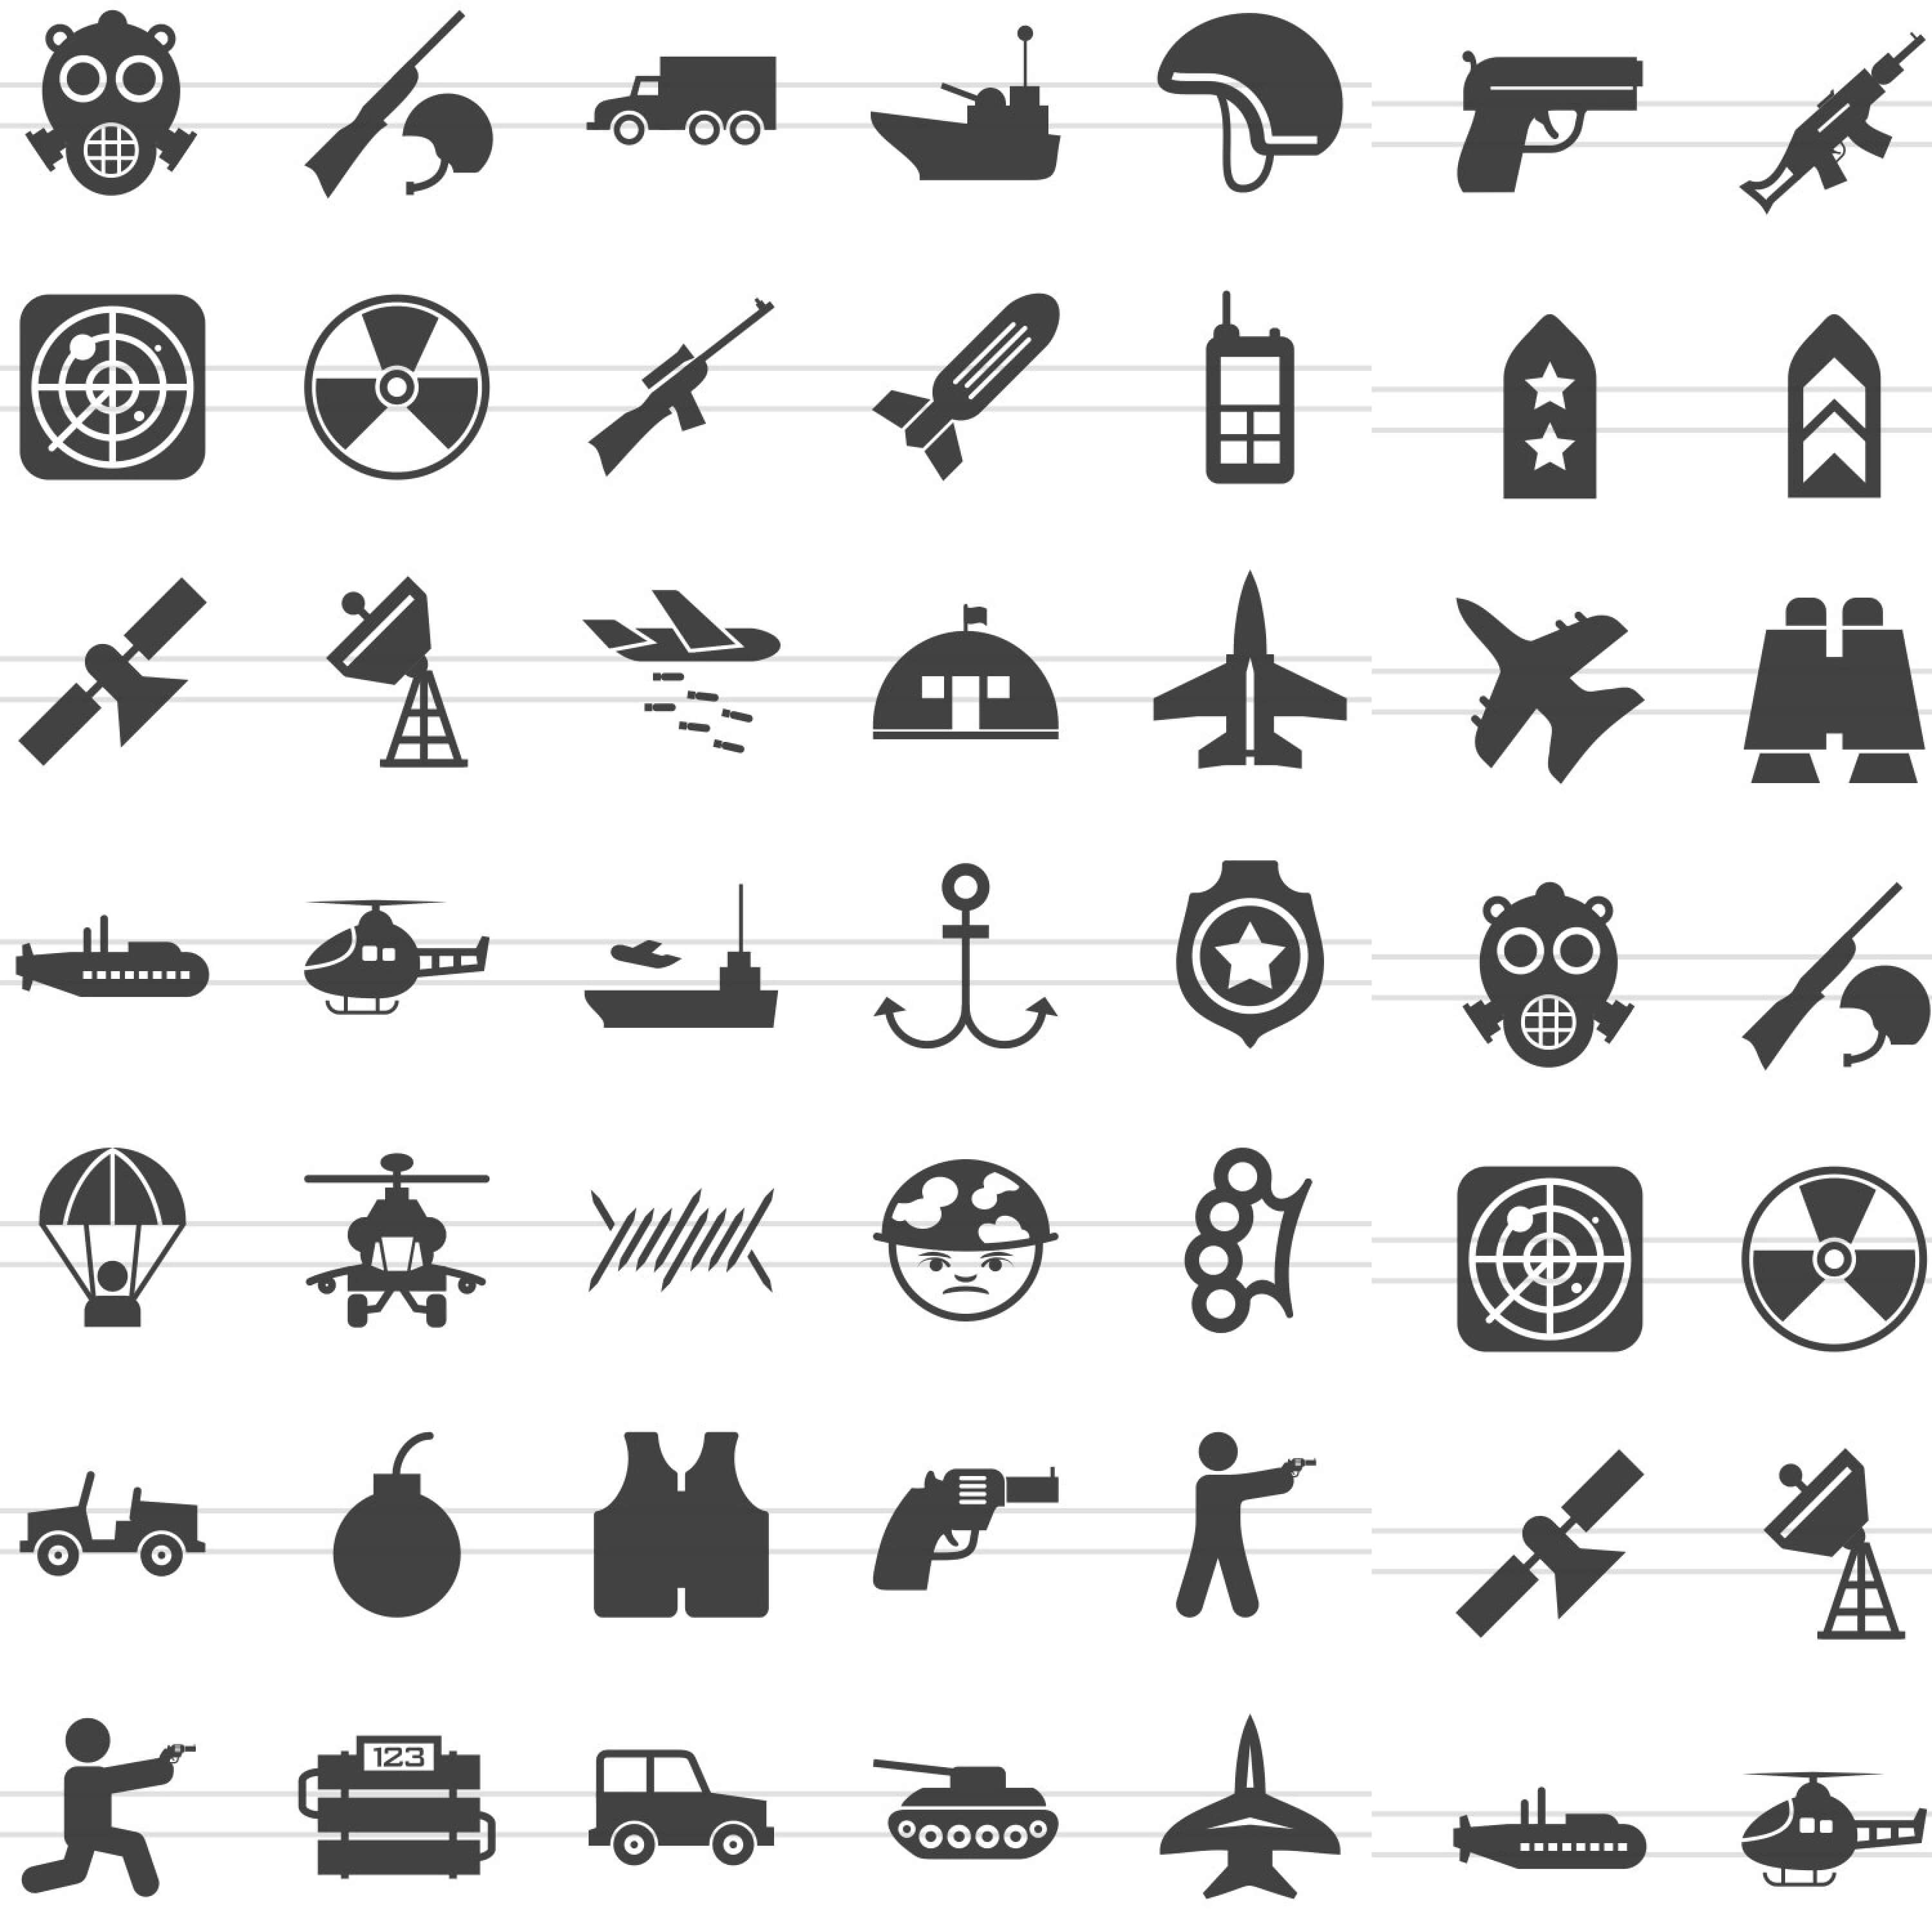 Small icons of a militarized theme: rockets, brass knuckles, bombs.